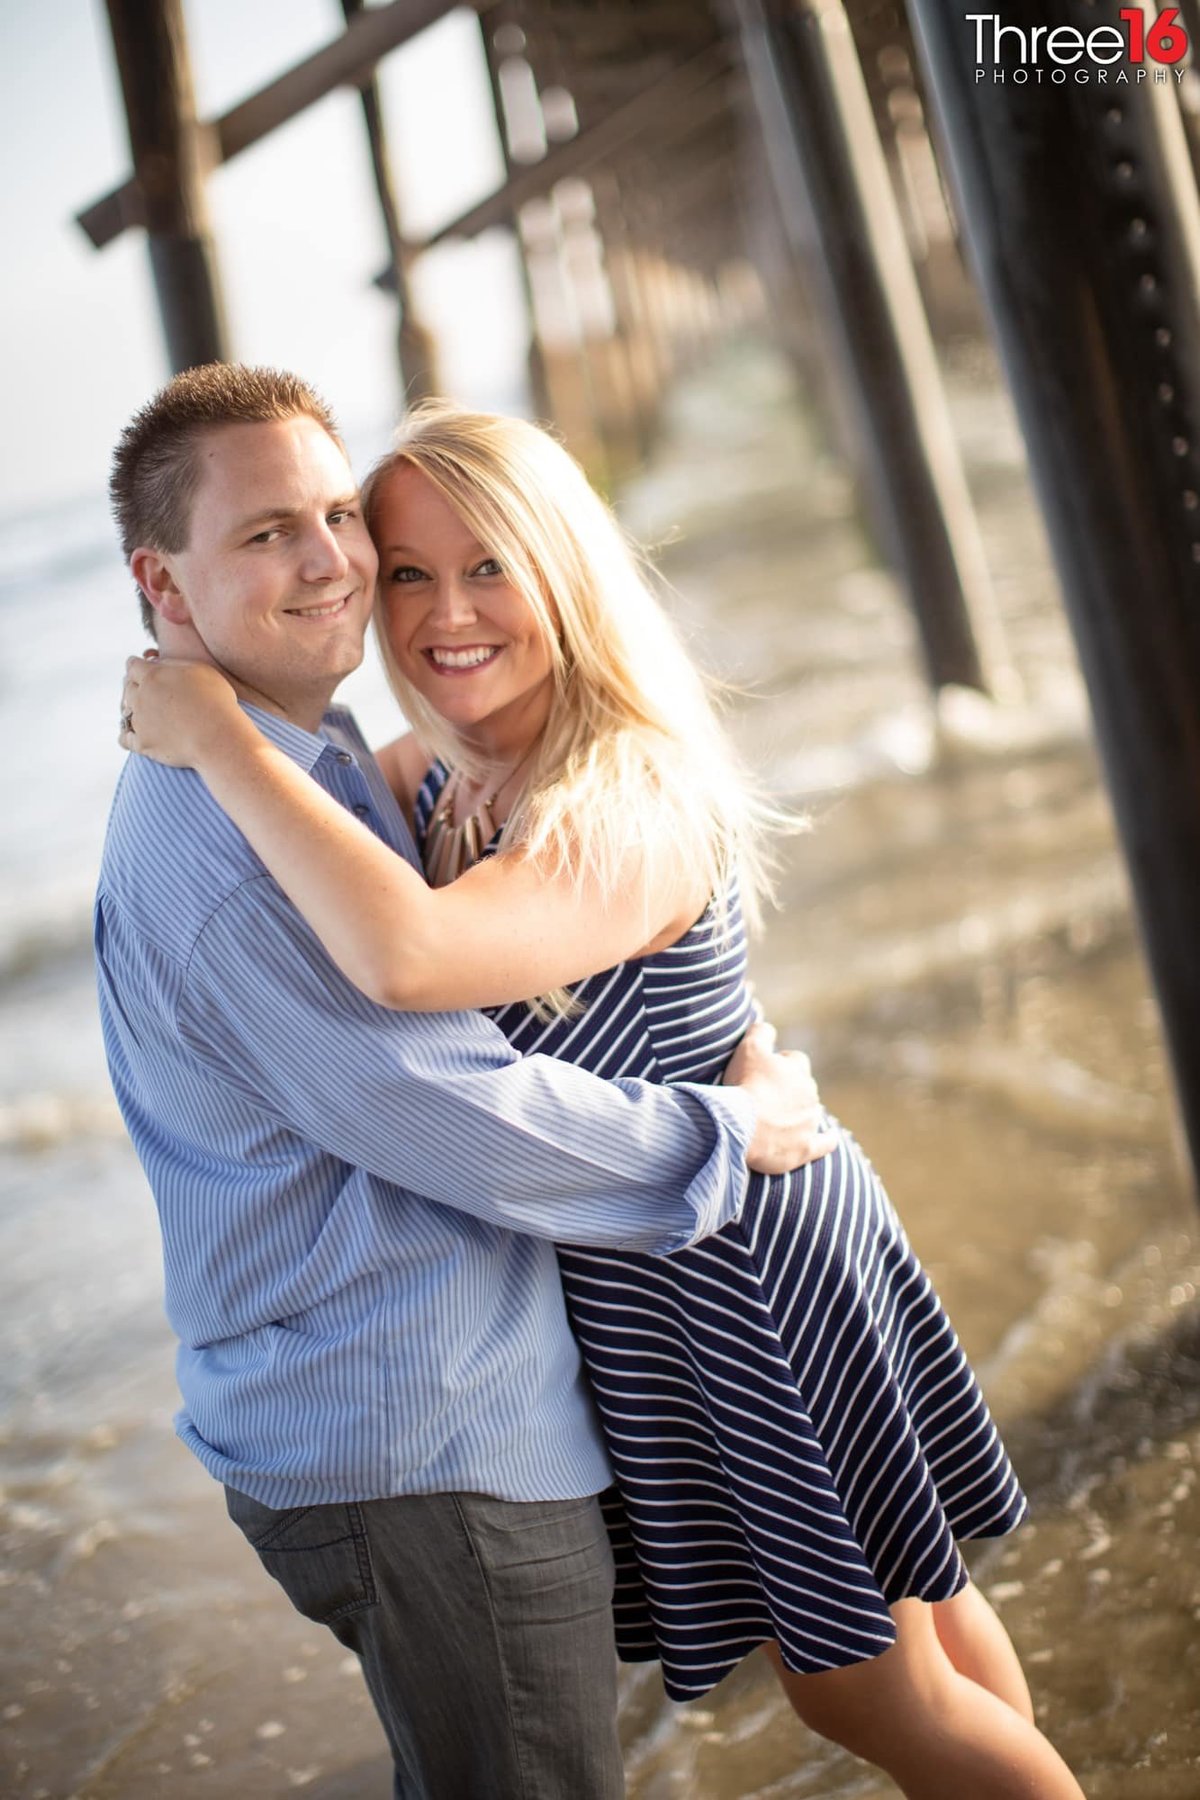 Engaged couple embrace one another during their engagement photo shoot